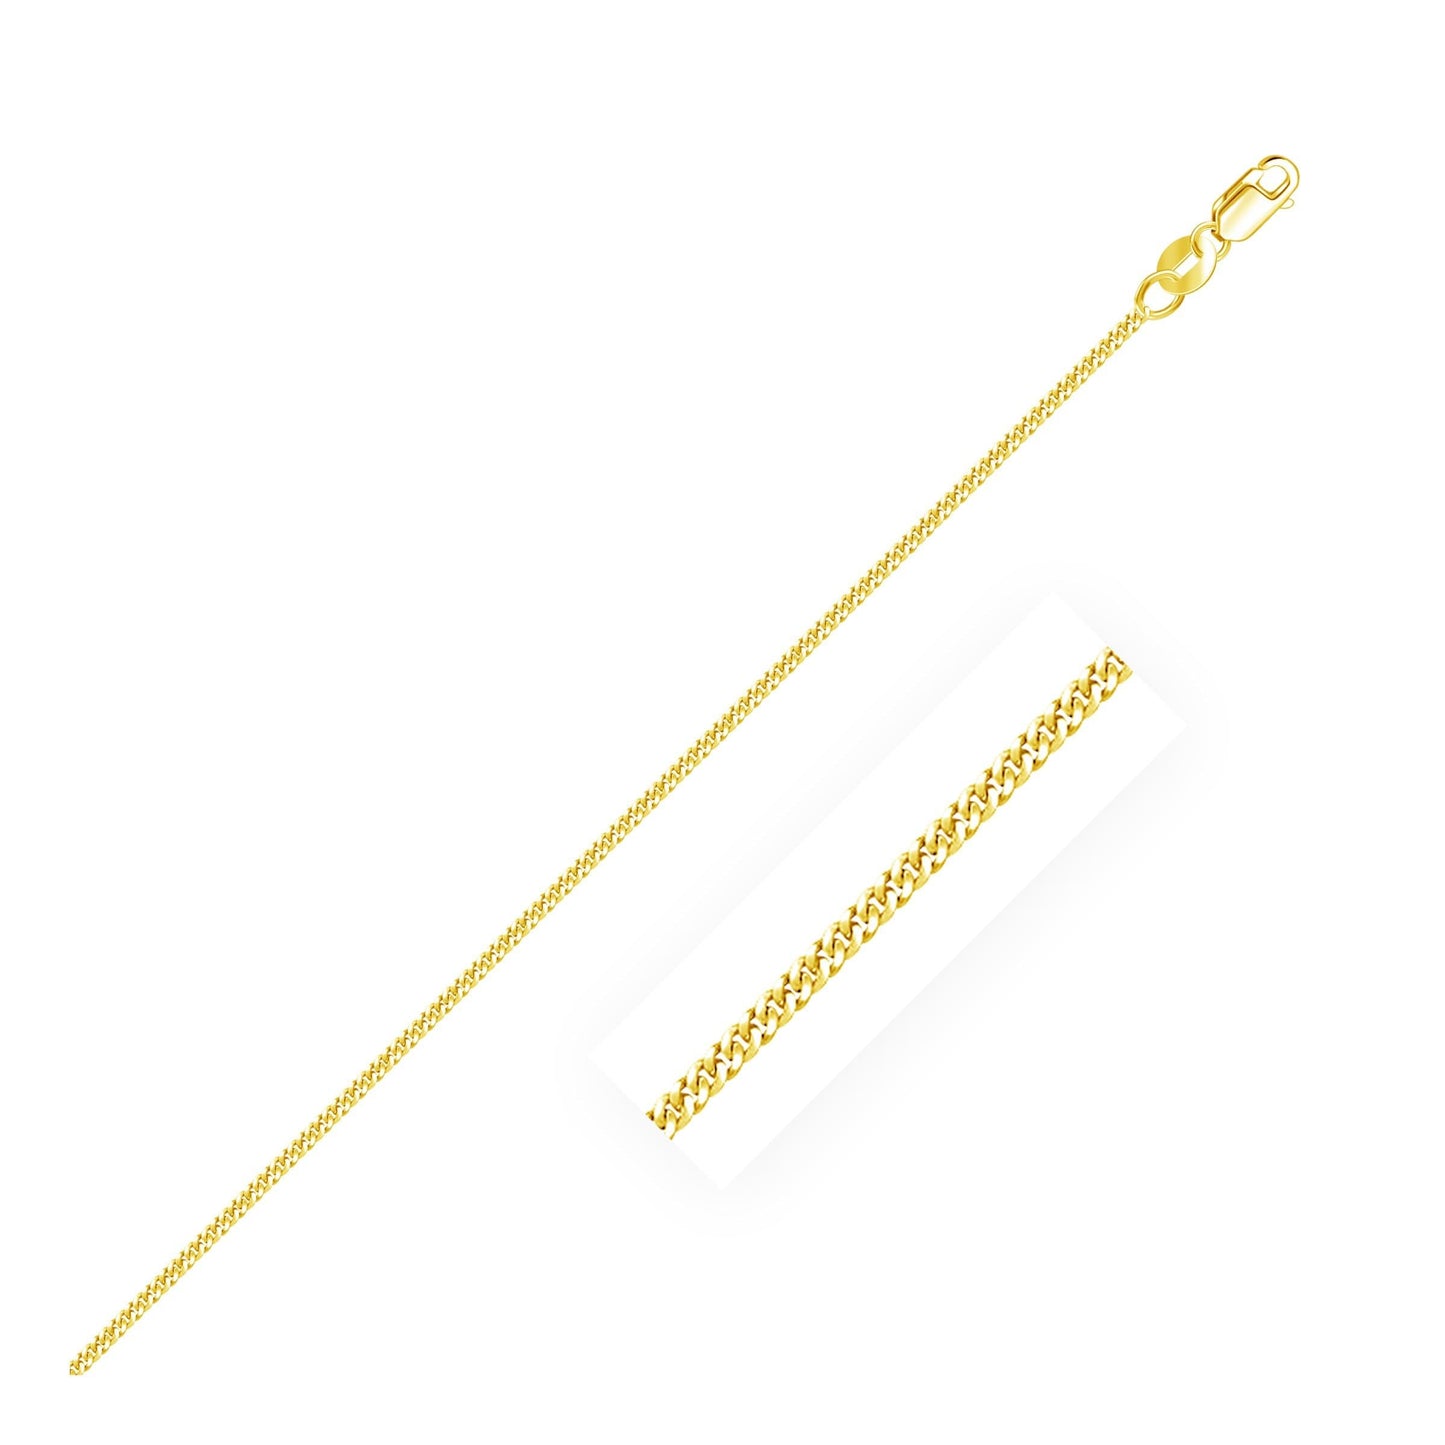 14k Yellow Gold Gourmette Chain in 1.5 mm